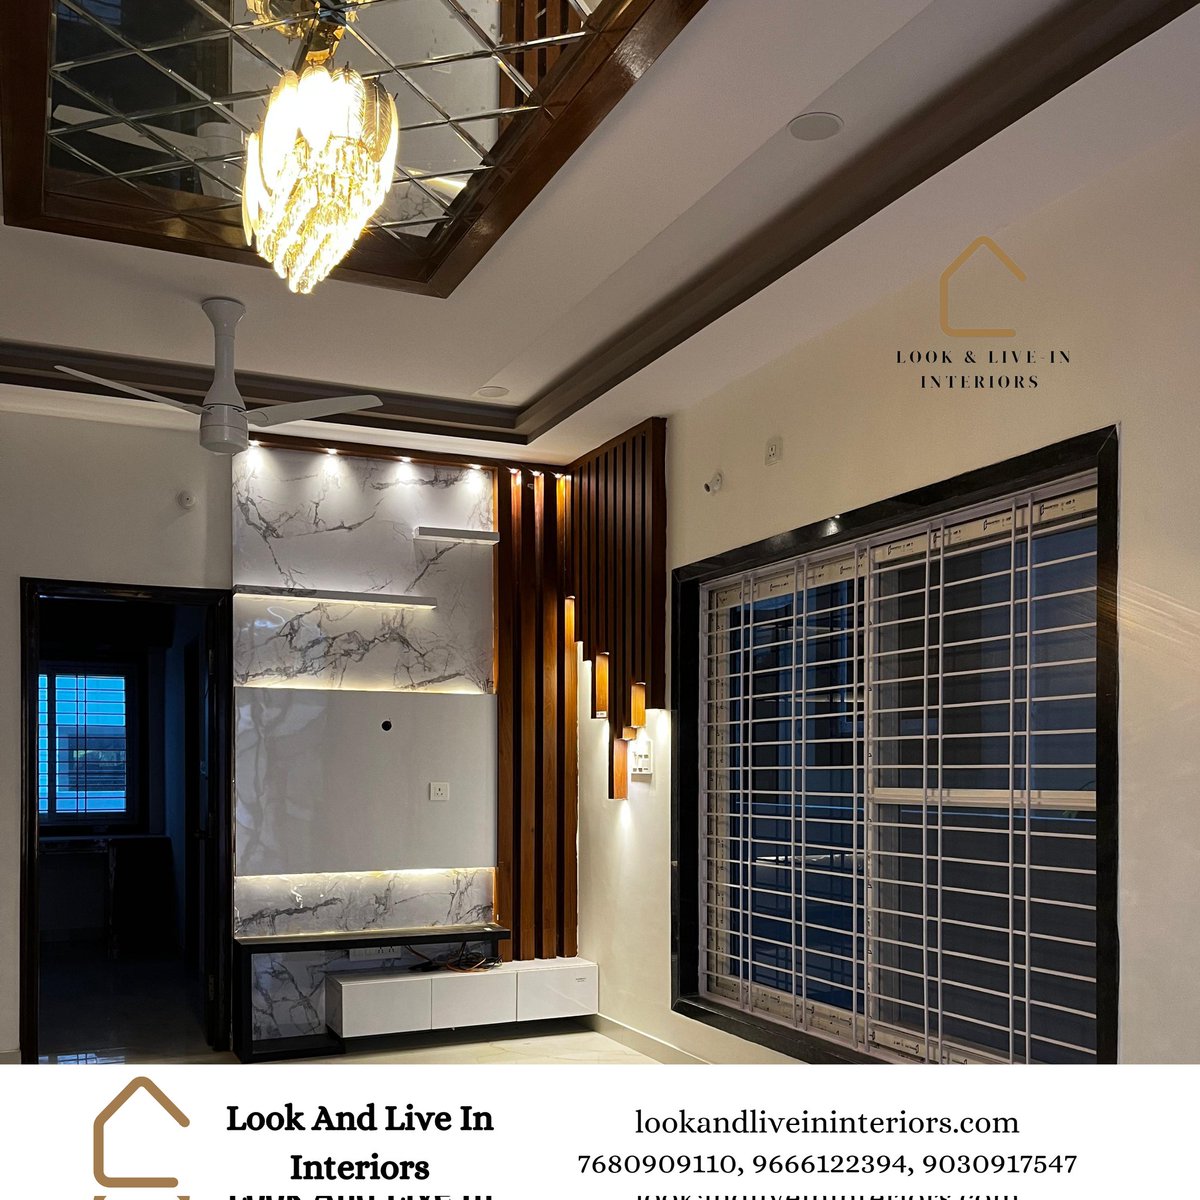 Discover the power of lighting in transforming your interiors from dull to dazzling #interiores #italiandesign #interiordesign #interiorstyling #interiorstyling #homeinterior #homeinteriors #homedecor #homedesign #hyderabadinteriorsdesigners #interiordesignershyderabad #trending